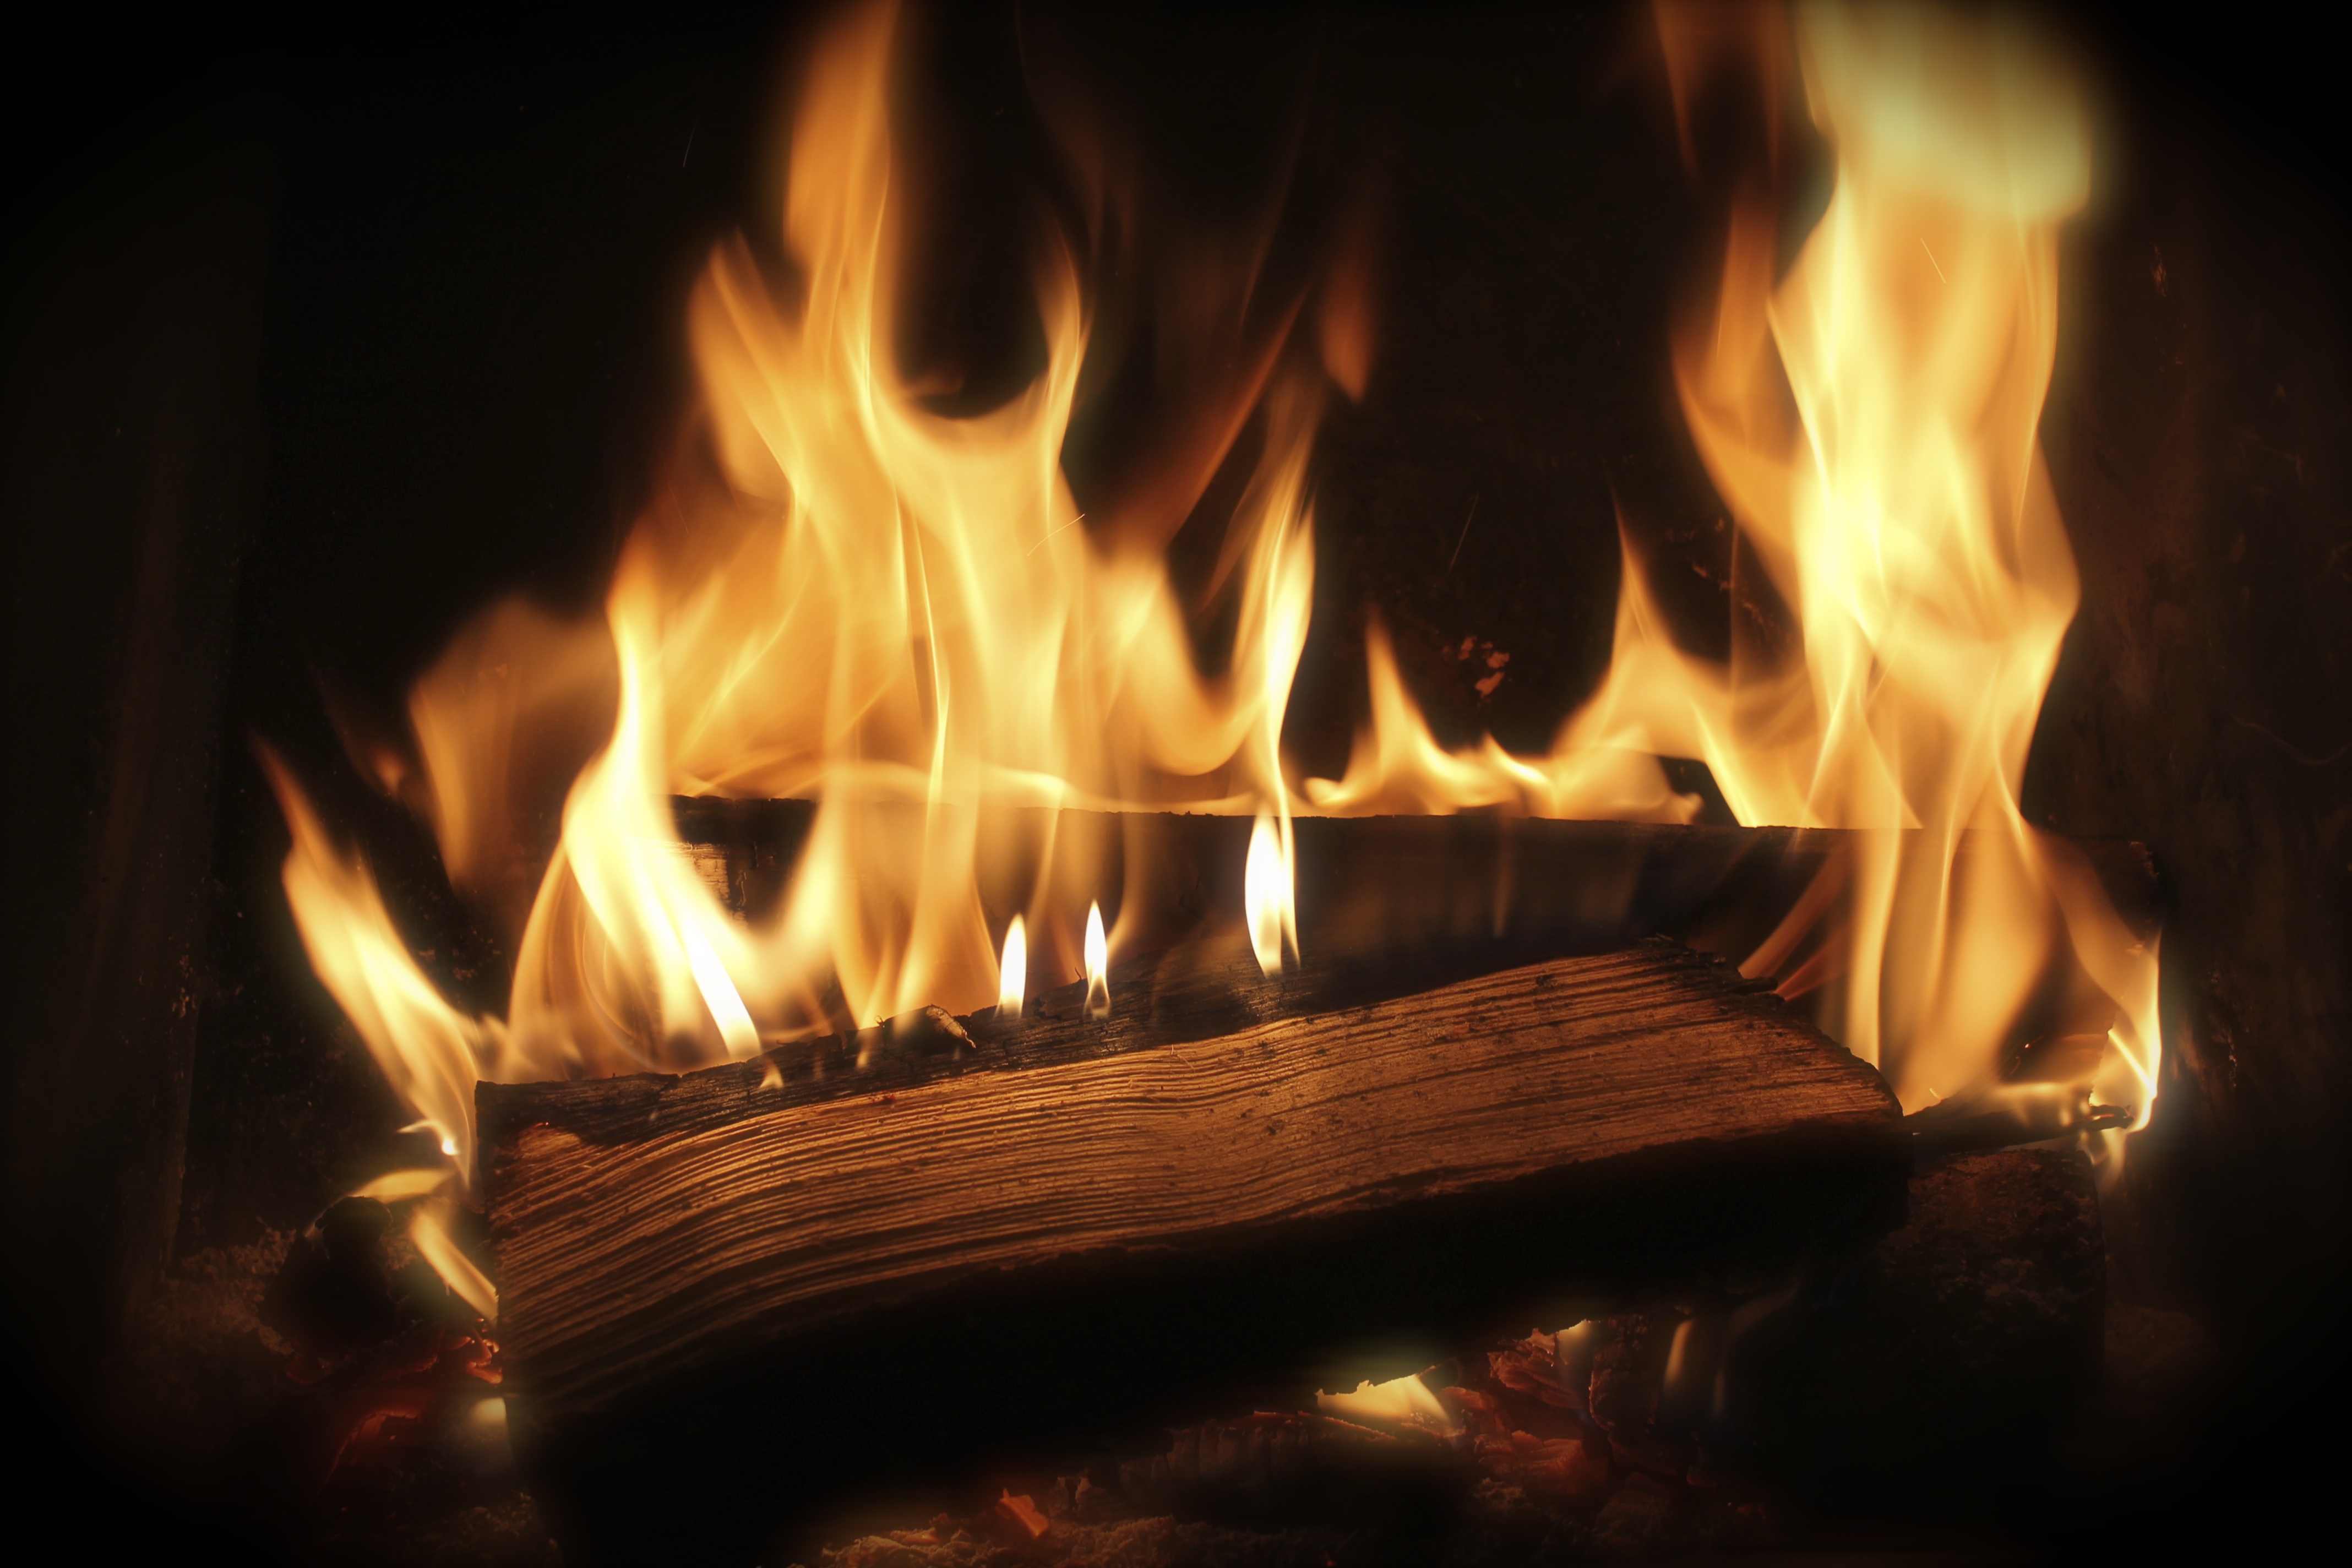 Free Images : wood, flame, fire, fireplace, darkness, firewood ...